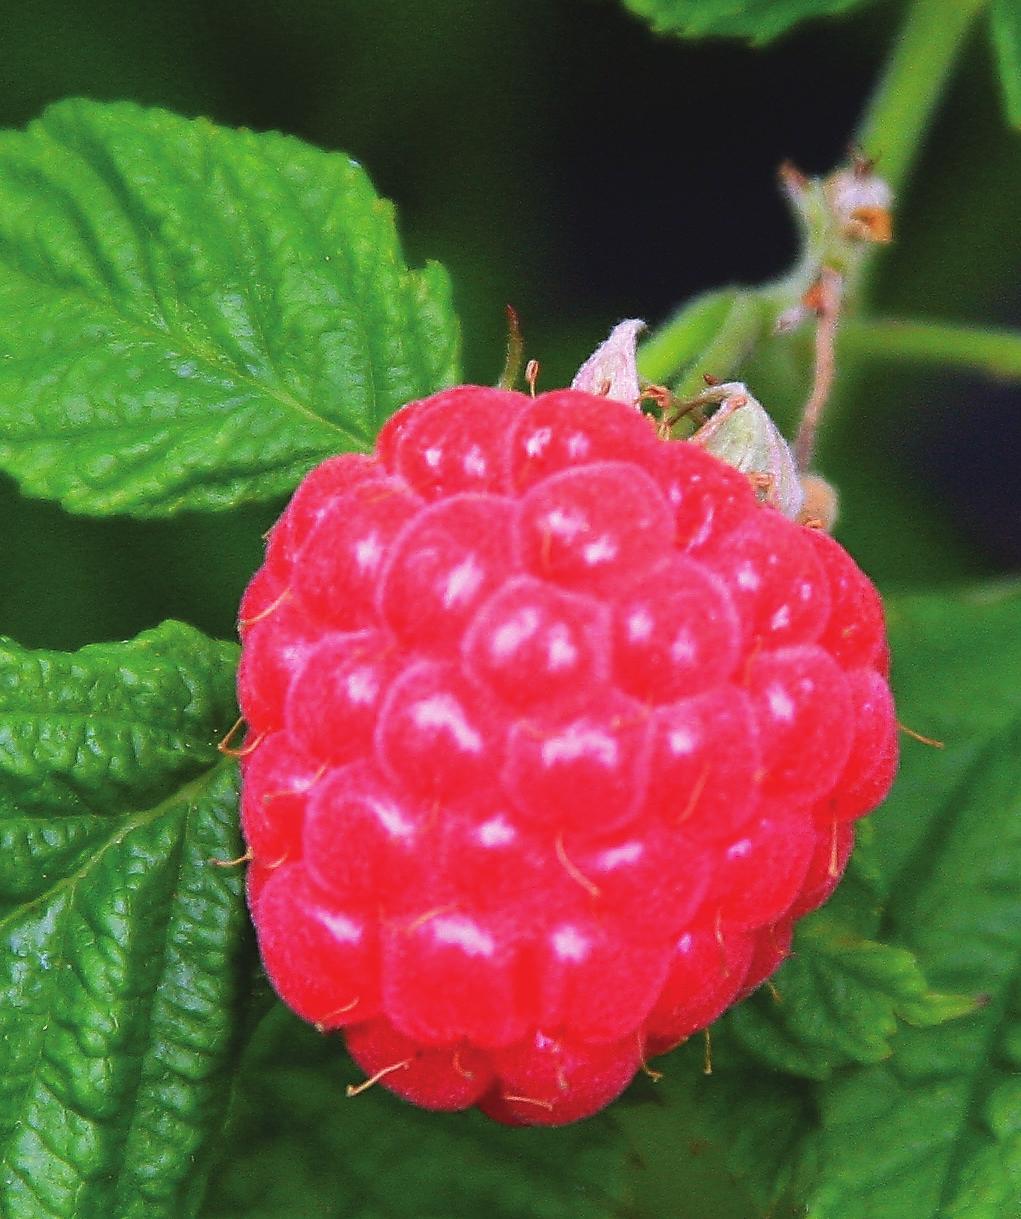 We are pleased to partner with another outstanding breeder, Fall Creek Farm and Nursery, to bring you three exciting selections from their new BrazelBerries collection.